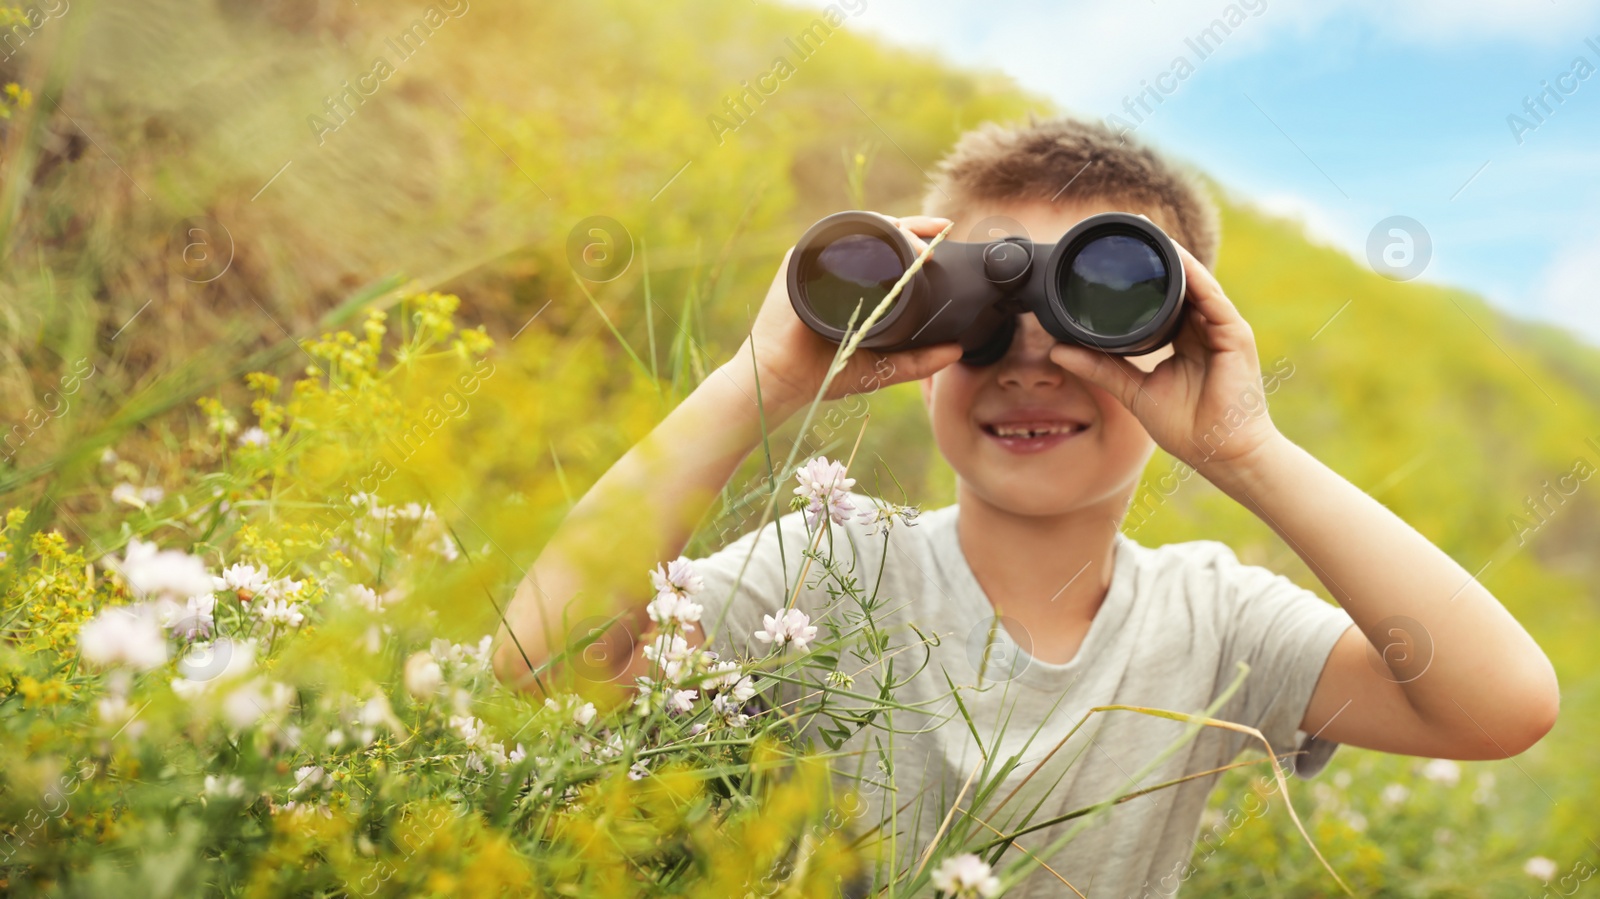 Image of Little boy with binoculars in field on sunny day